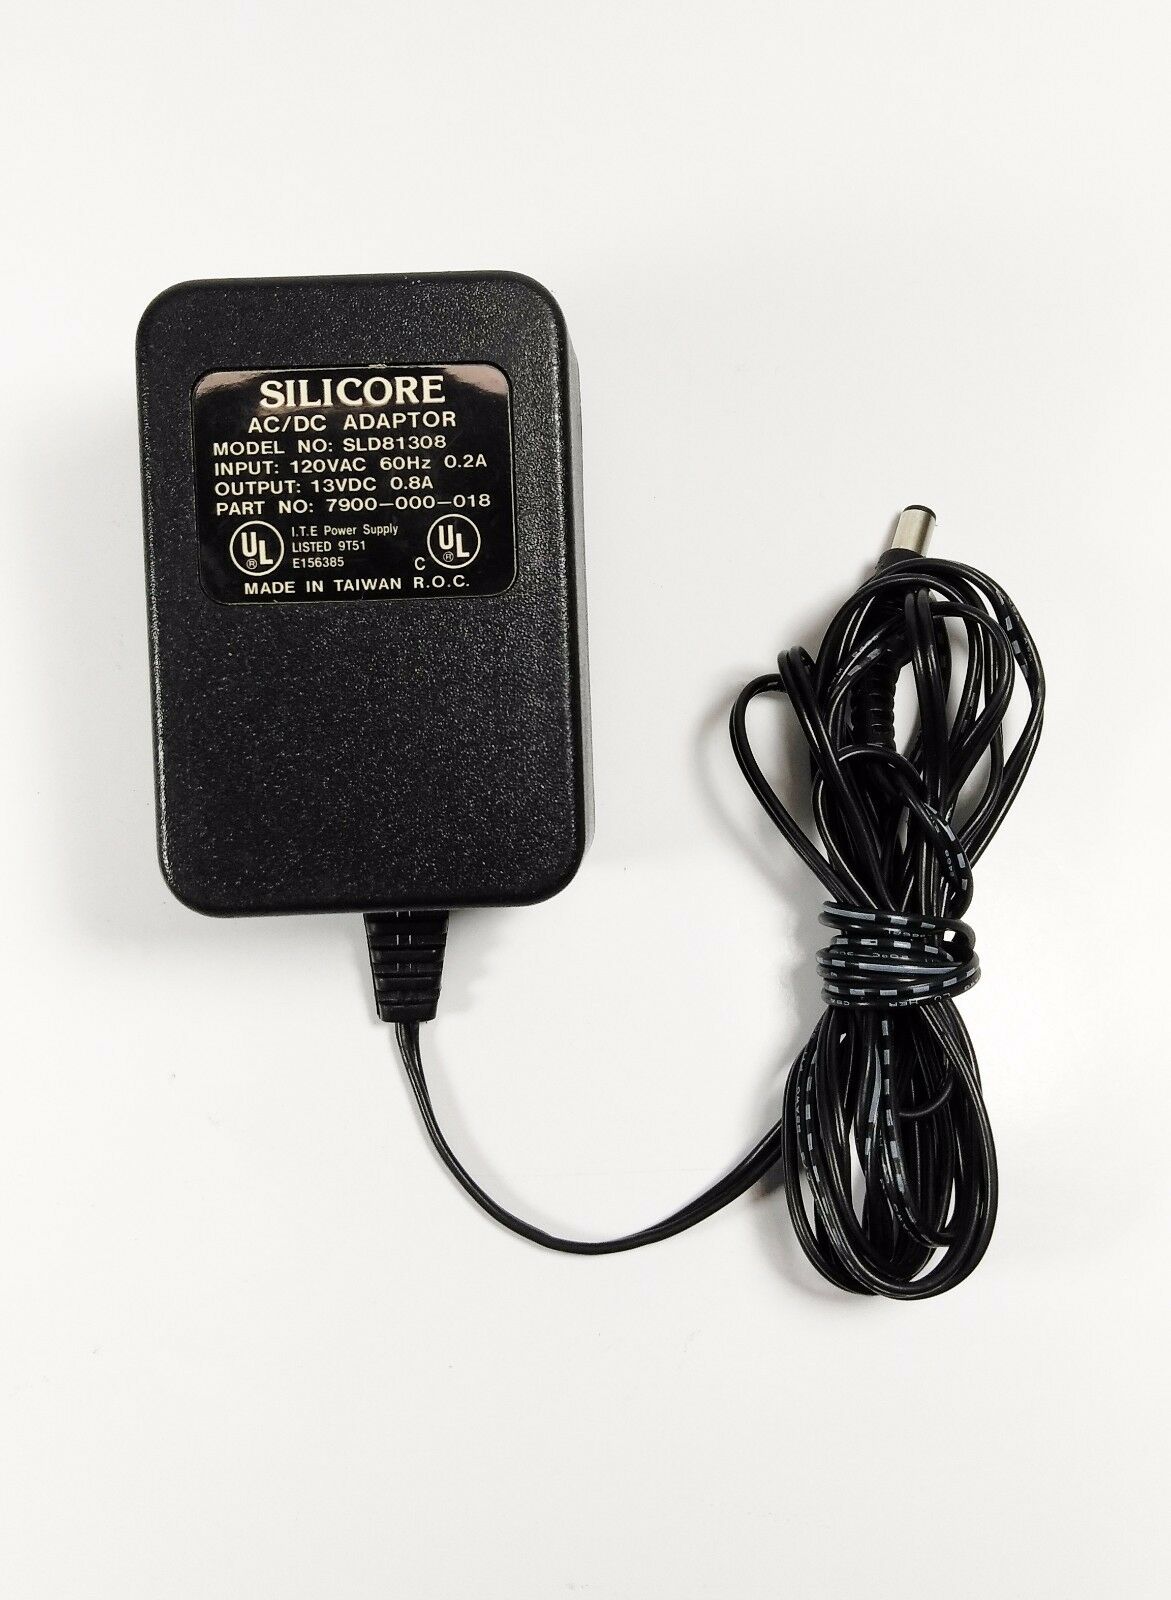 NEW 13V 0.8A Silicore SLD81308 7900-000-018 AC DC Adapter For Space Scanner